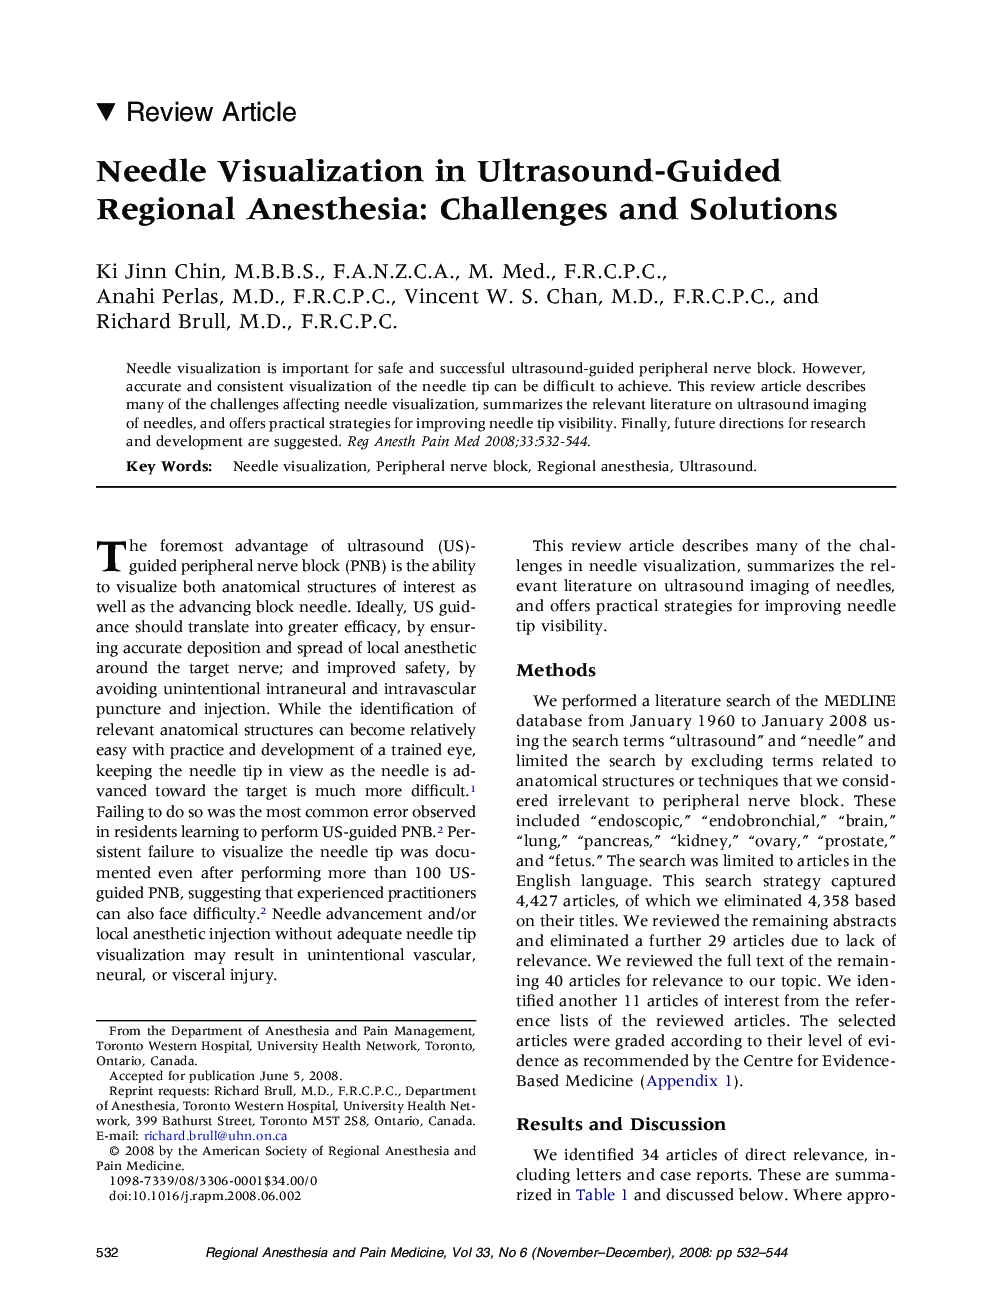 Needle Visualization in Ultrasound-Guided Regional Anesthesia: Challenges and Solutions